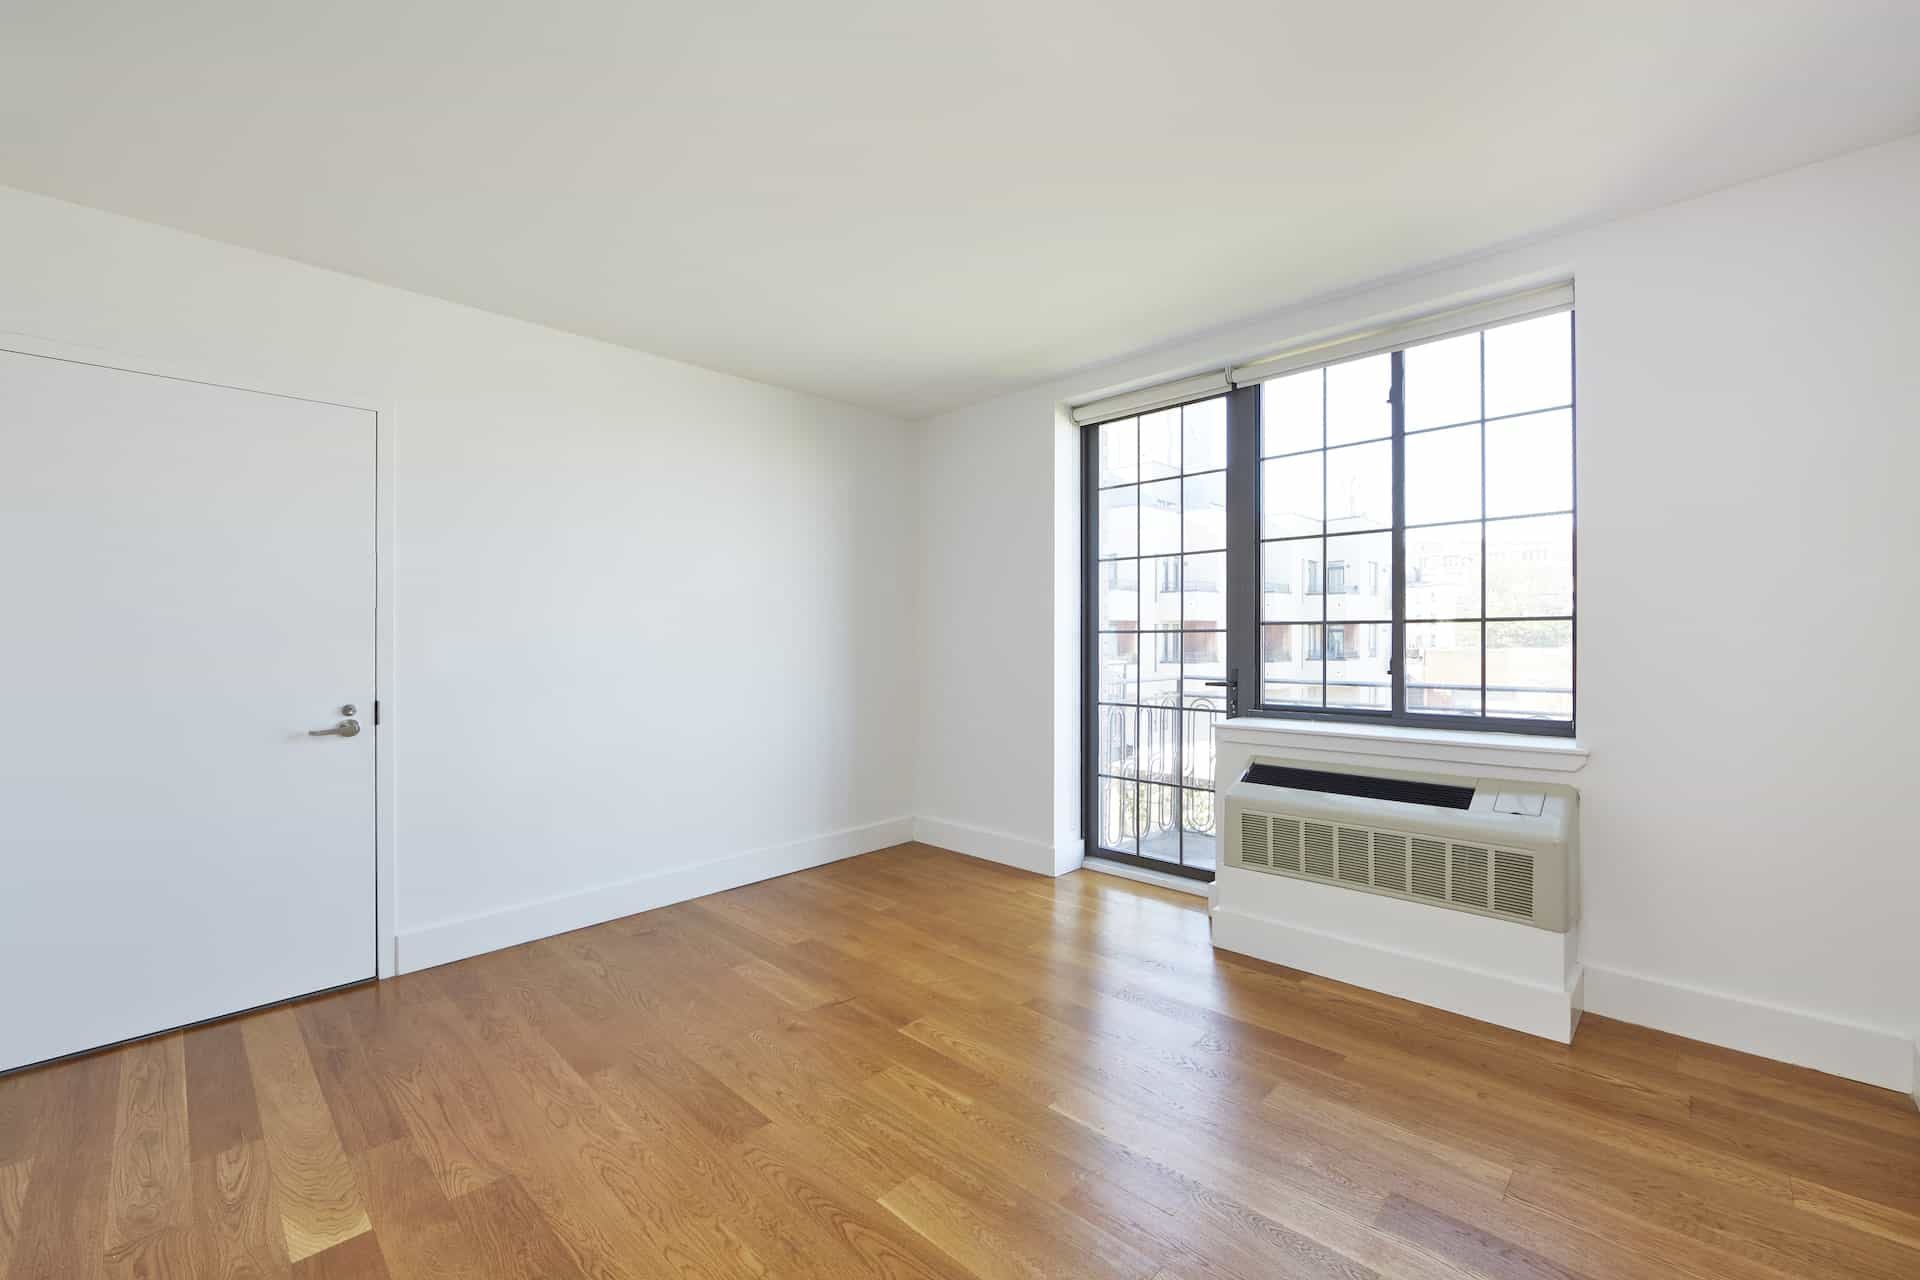 Living room at 83 Bushwick Place apartments in Brooklyn with hardwood floors, a/c unit, large windows and door out to patio.